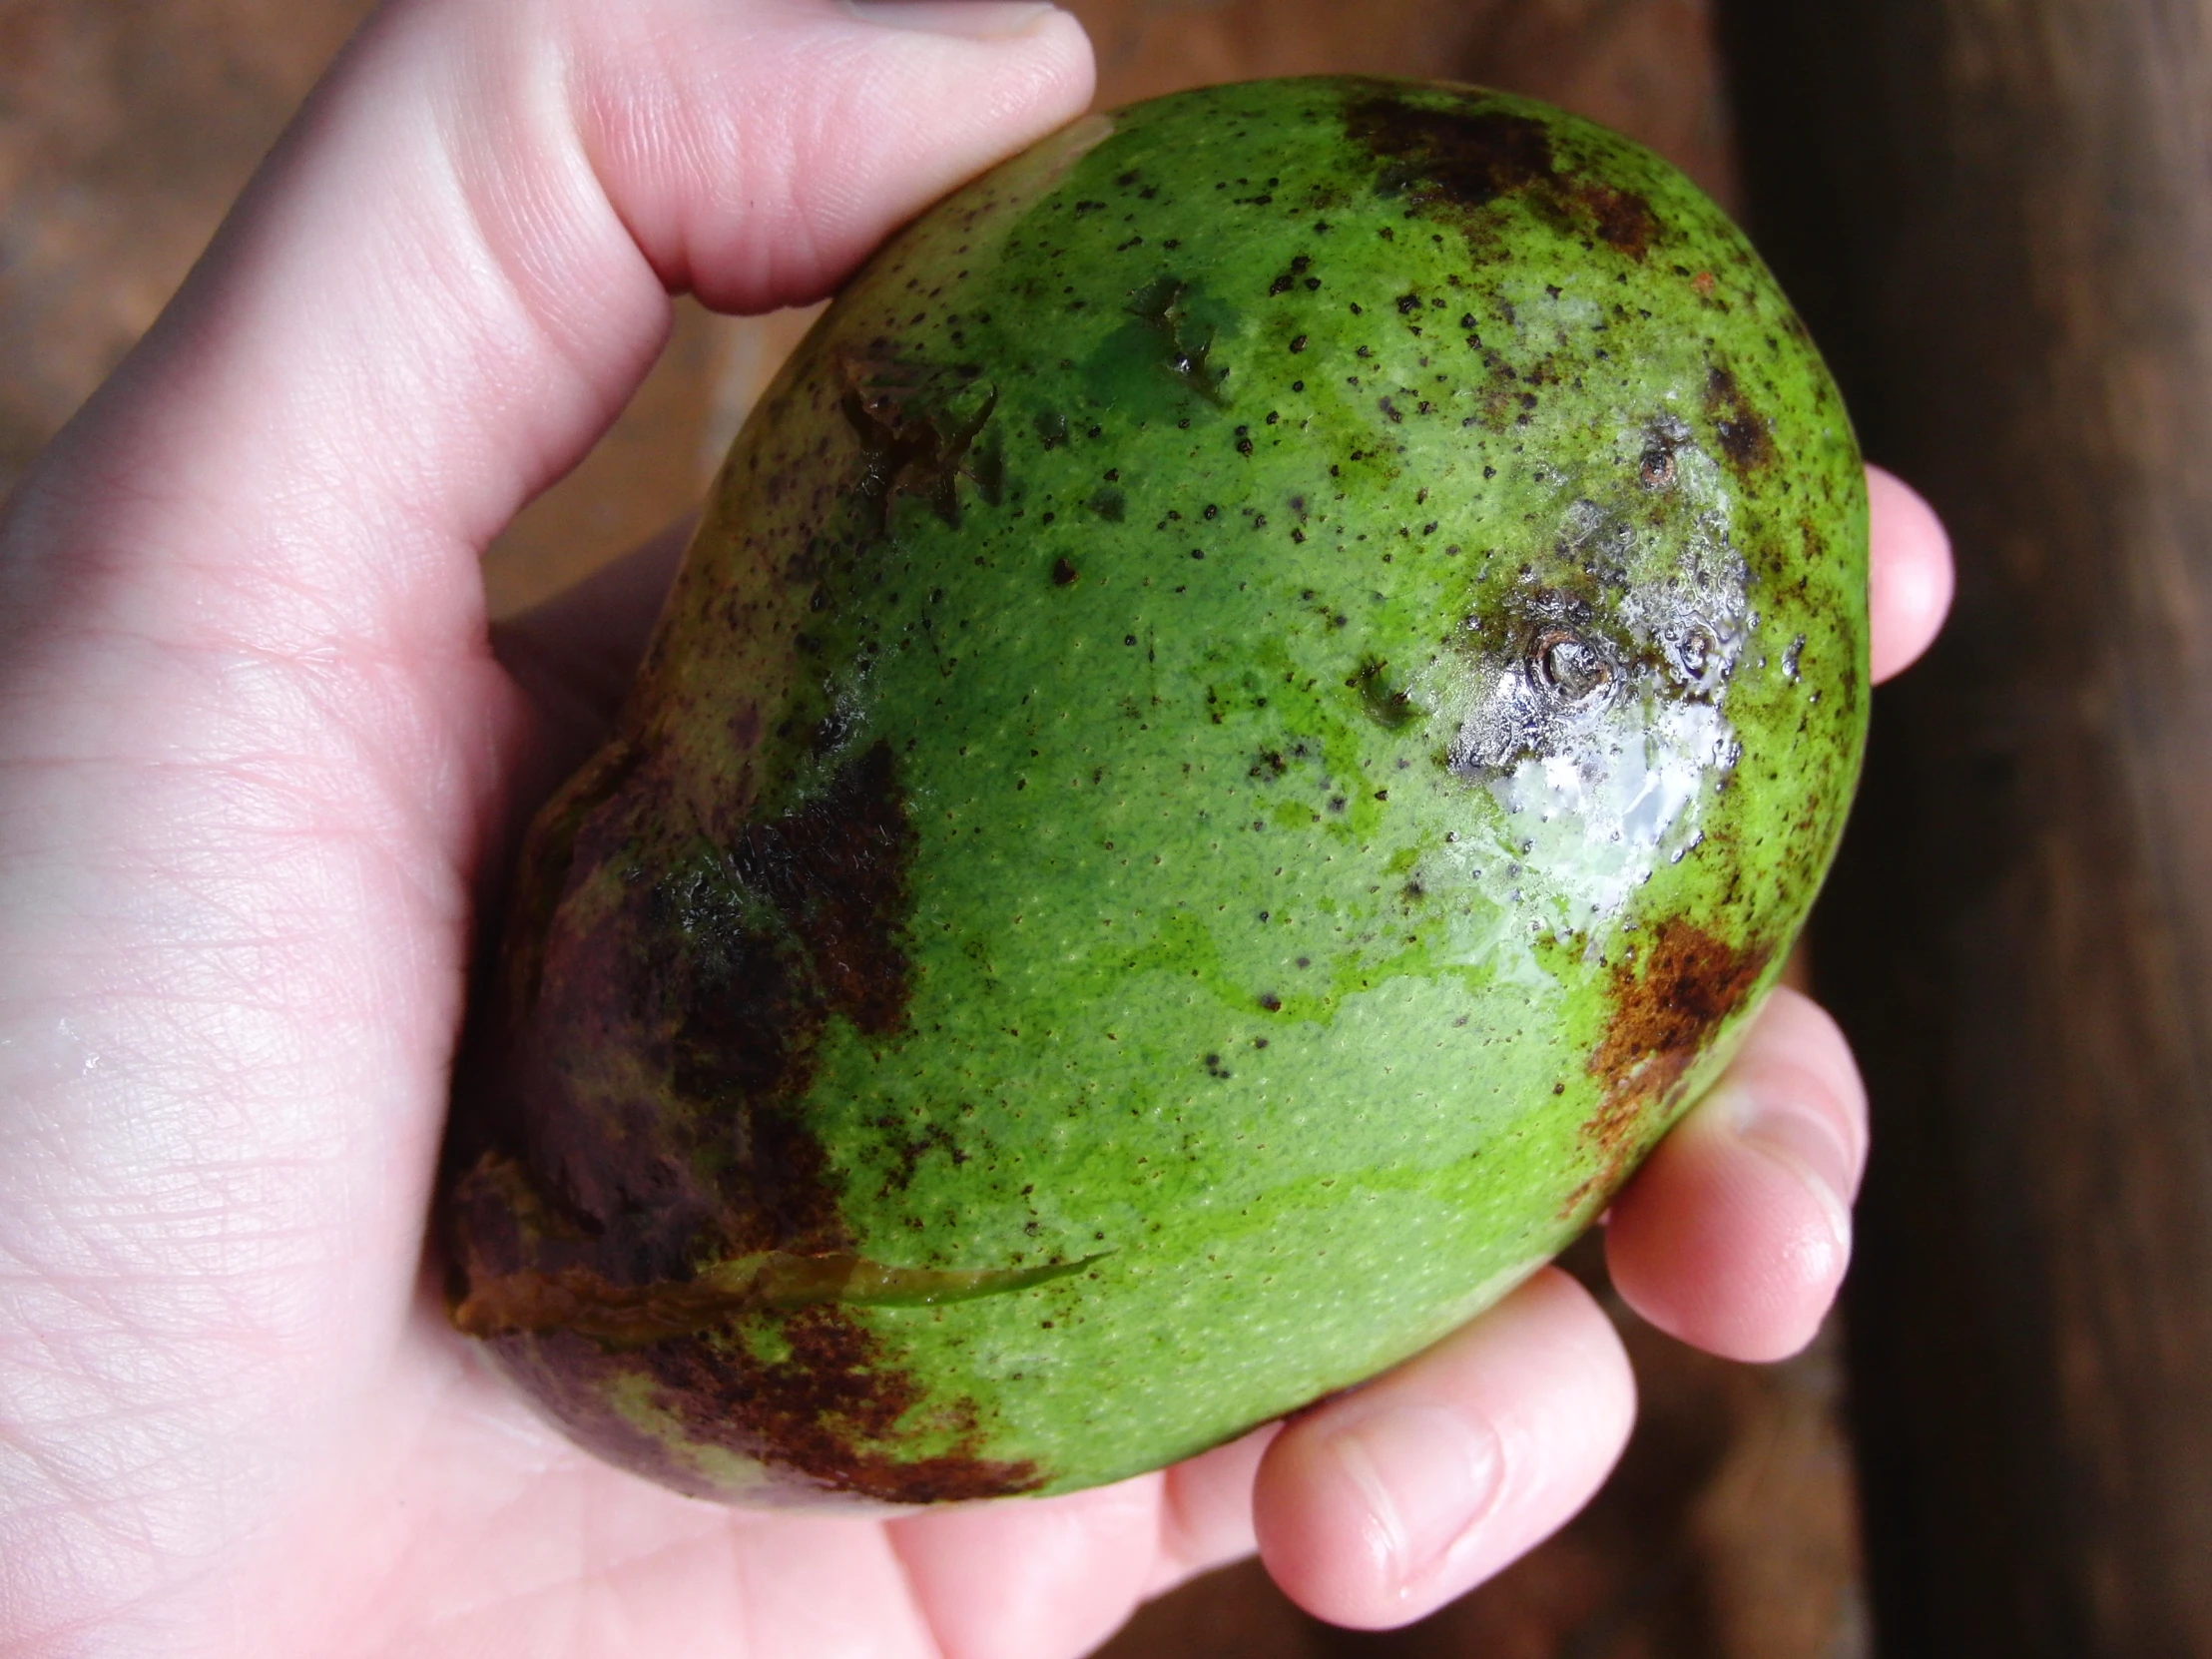 a person holds out a green, dirty fruit